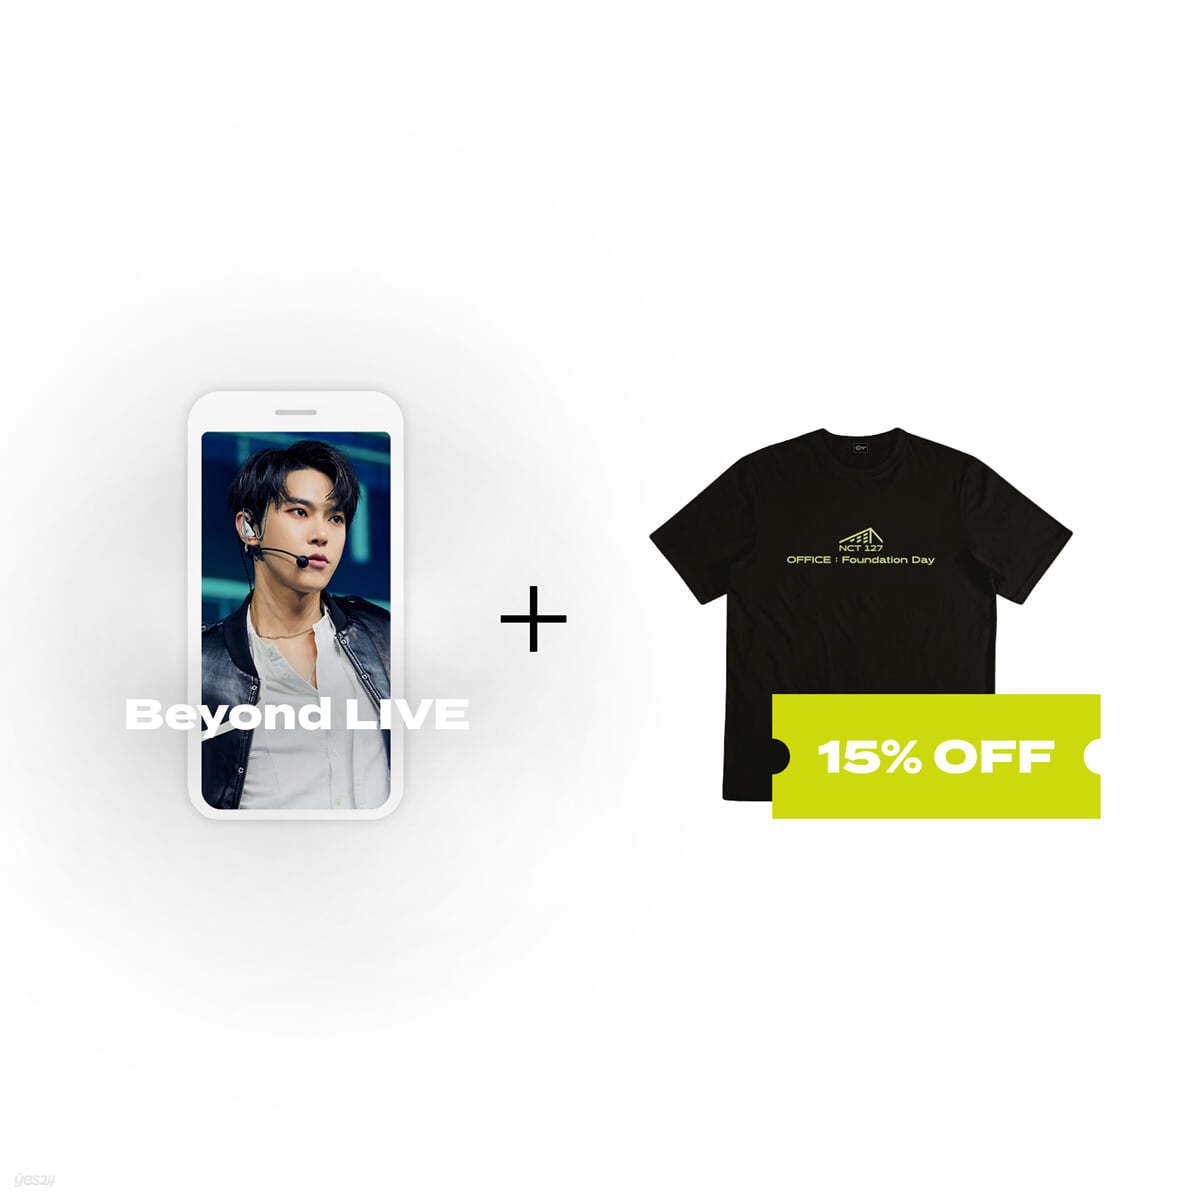 Beyond LIVE 관람권 + T-SHIRT Beyond LIVE - NCT 127 ONLINE FANMEETING &#39;OFFICE : Foundation Day&#39;